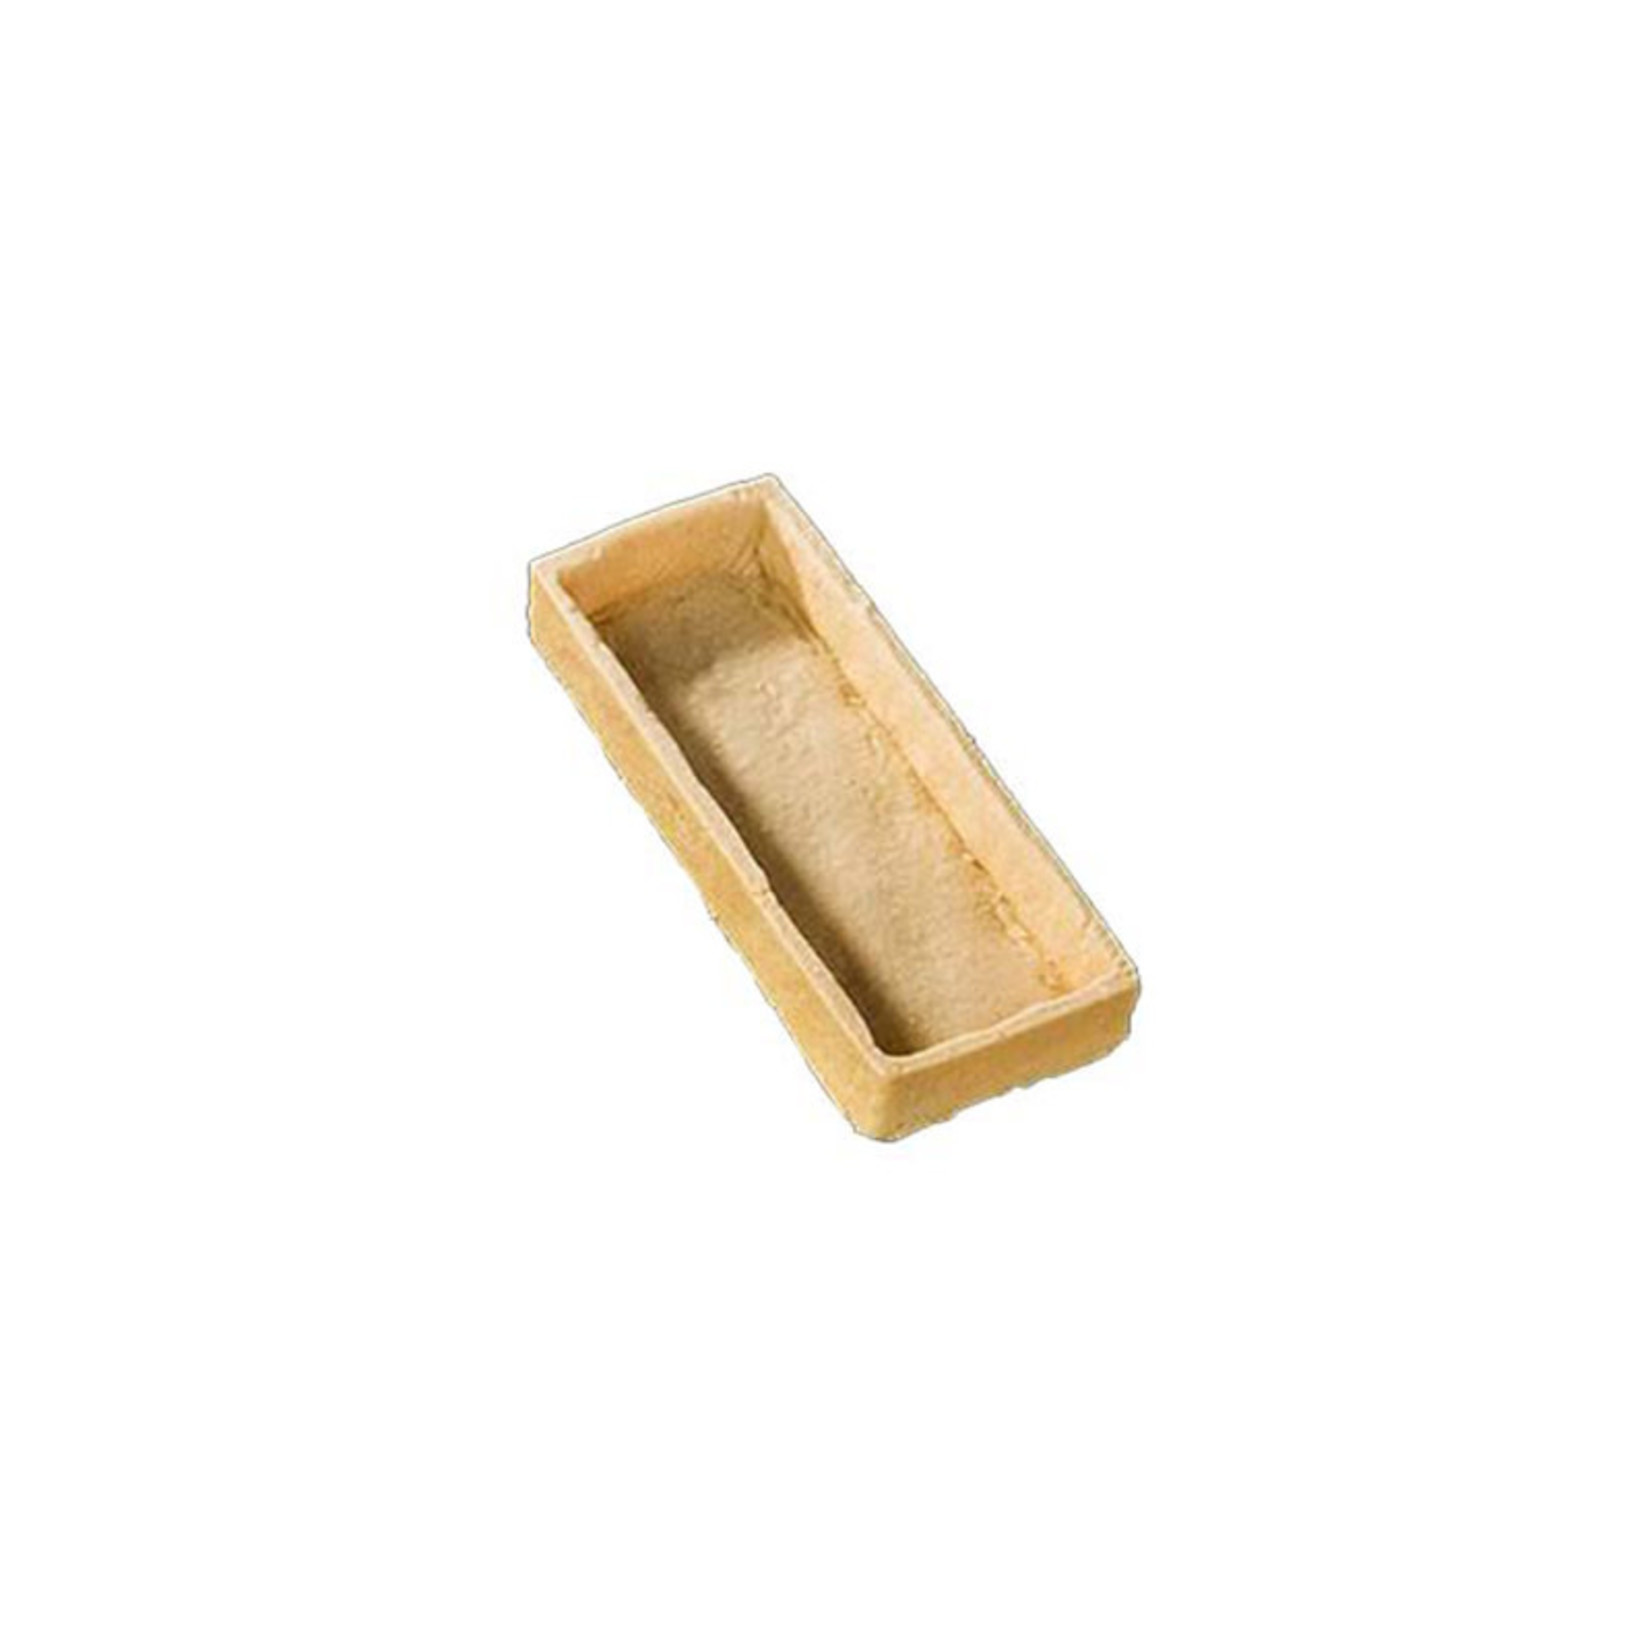 Le Chic Patissier Le Chic Patissier - Tart shell, Sweet rectangle - 4x1.5'' (75ct), 79023